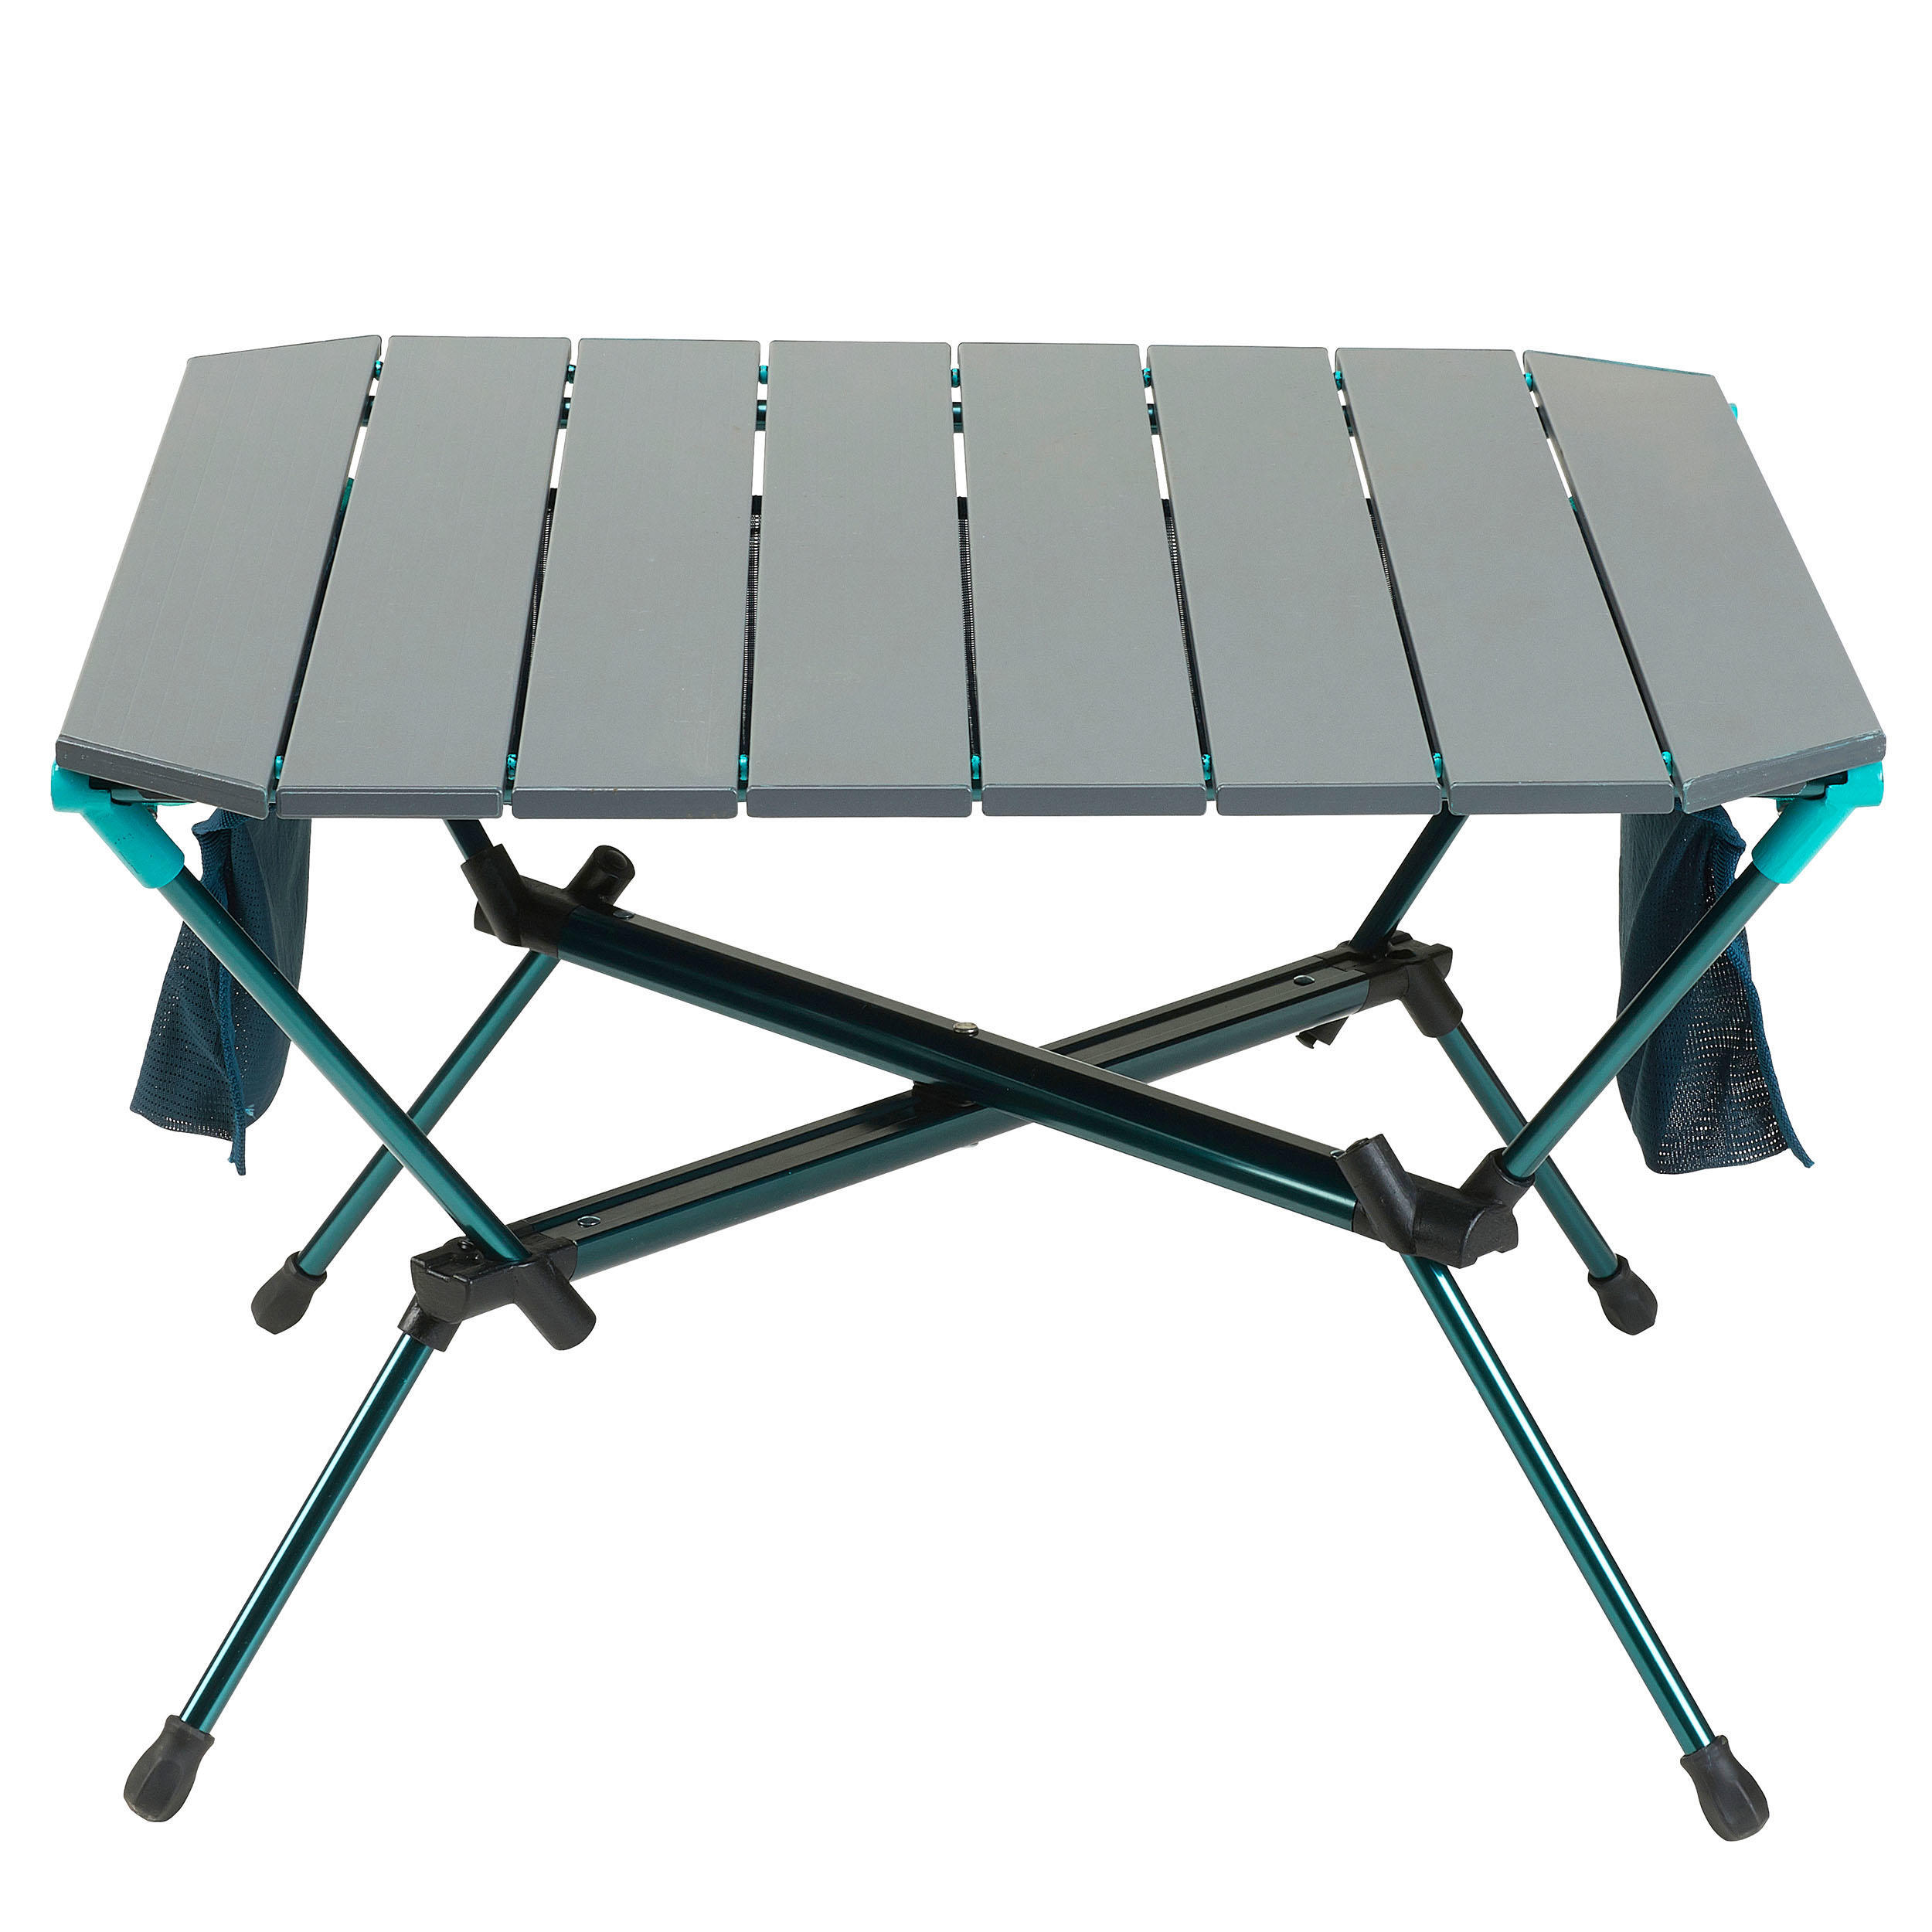 FOLDING CAMPING TABLE - MH500 6/11